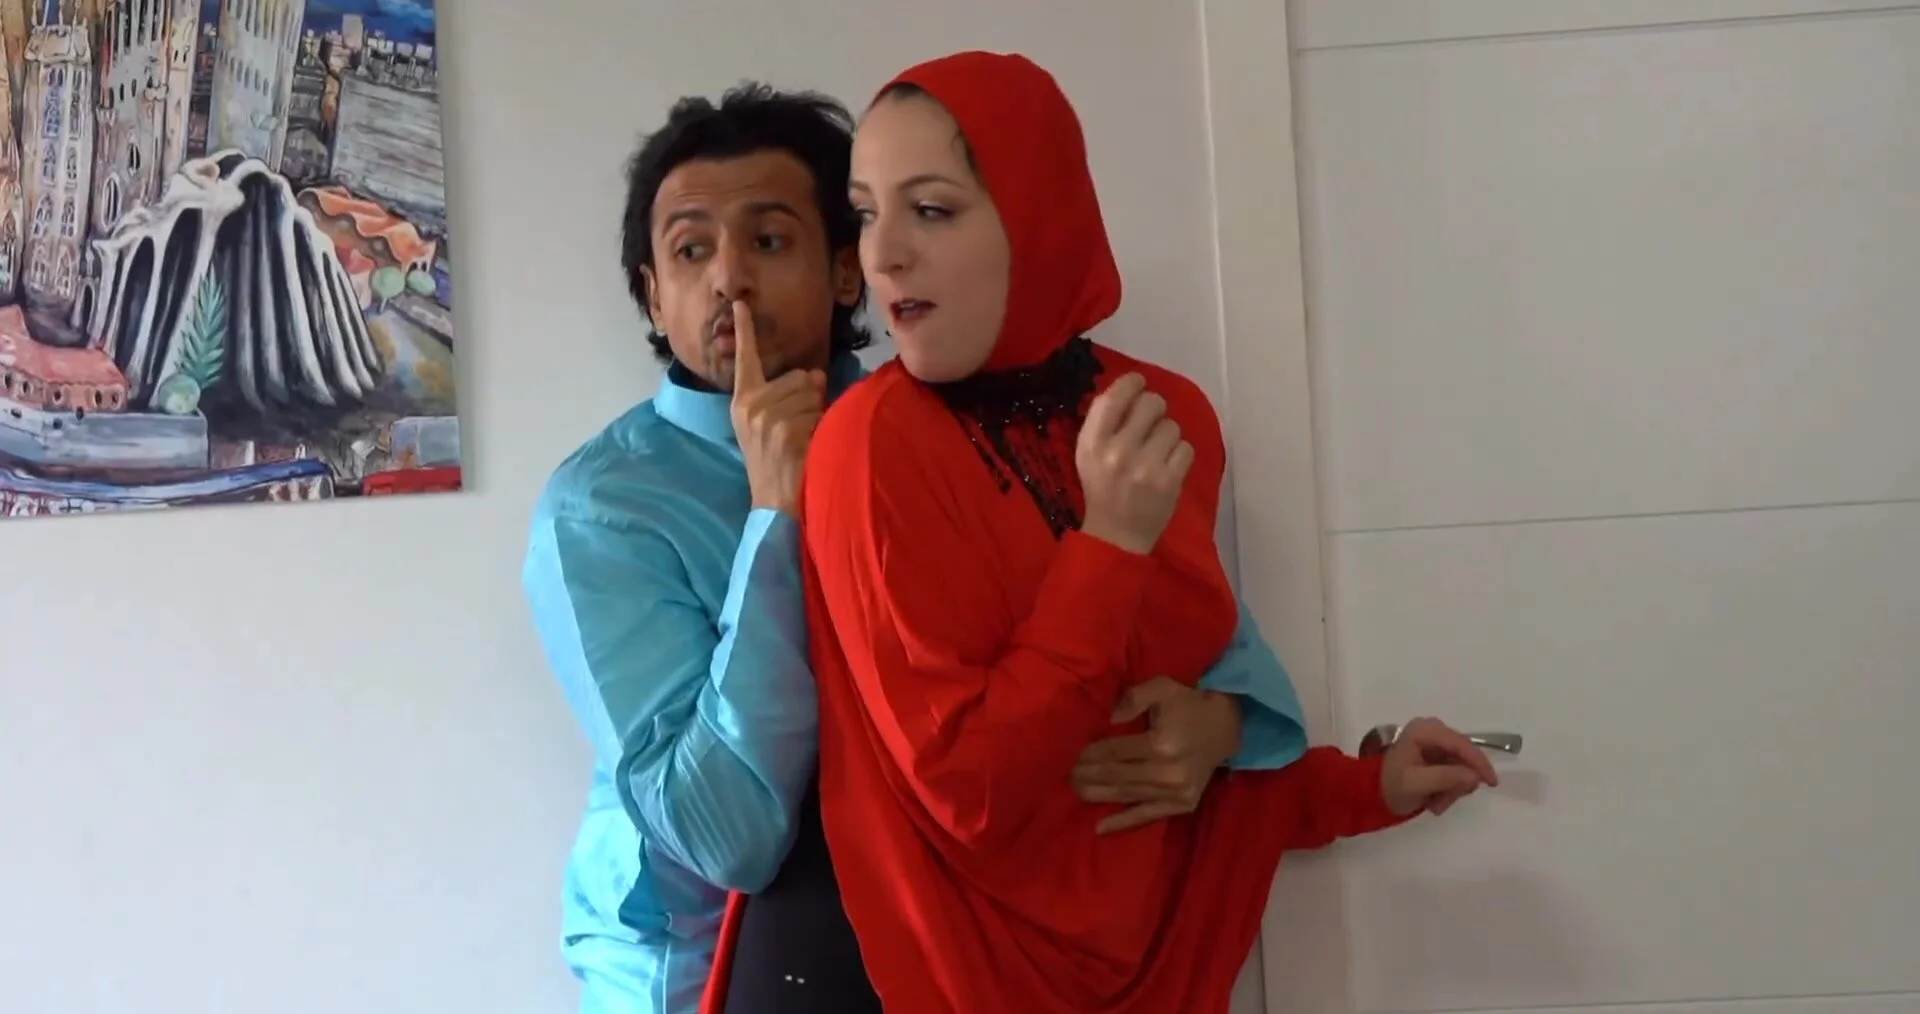 Gorgeous MILF in hijab seduced by her husbands friend pic